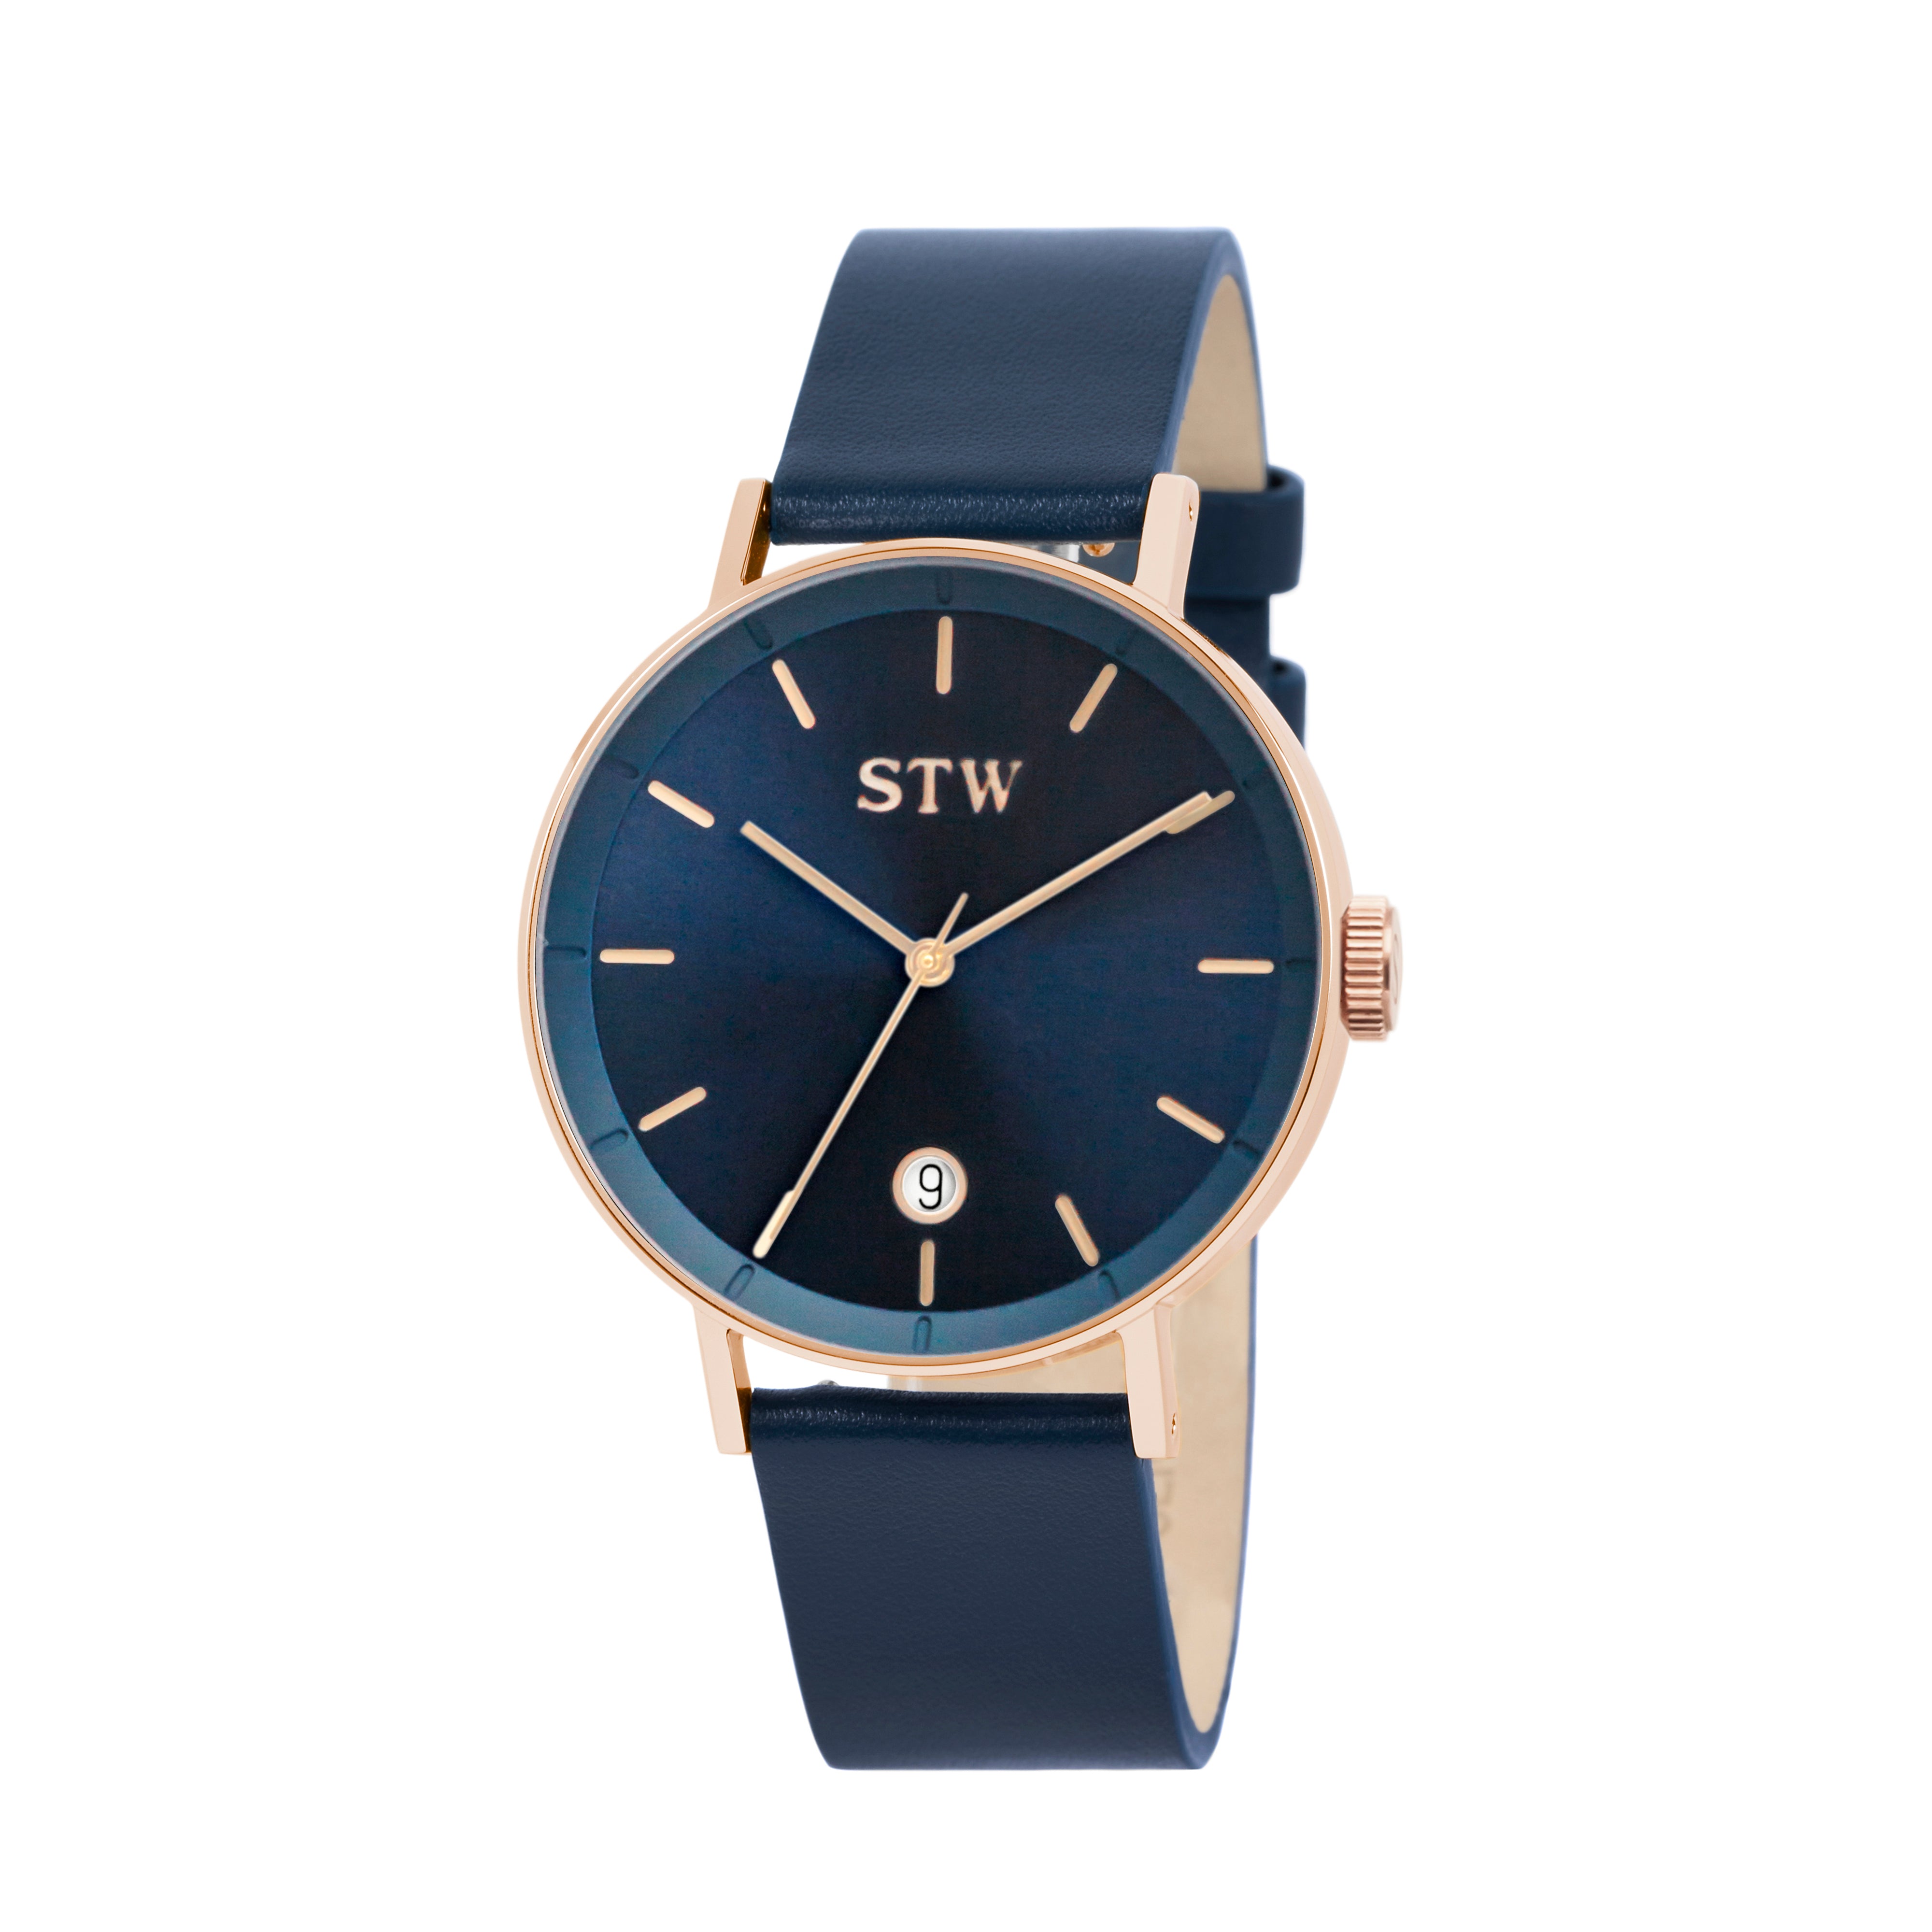 CUT OUT -  BLUE DIAL / BLUE LEATHER STRAP WATCH